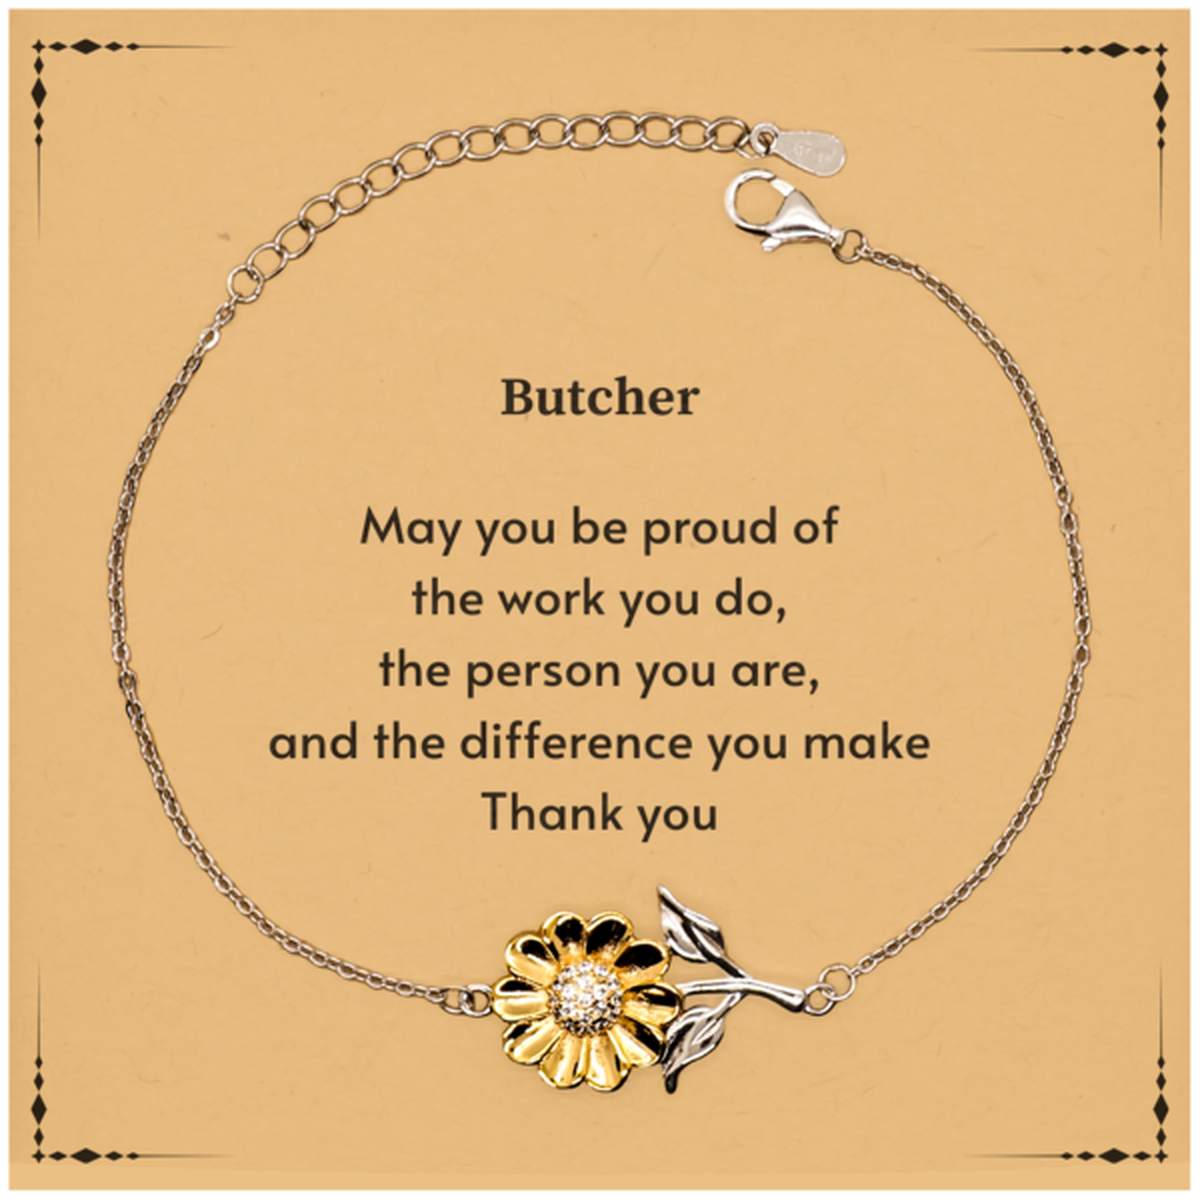 Heartwarming Sunflower Bracelet Retirement Coworkers Gifts for Butcher, Butcher May You be proud of the work you do, the person you are Gifts for Boss Men Women Friends